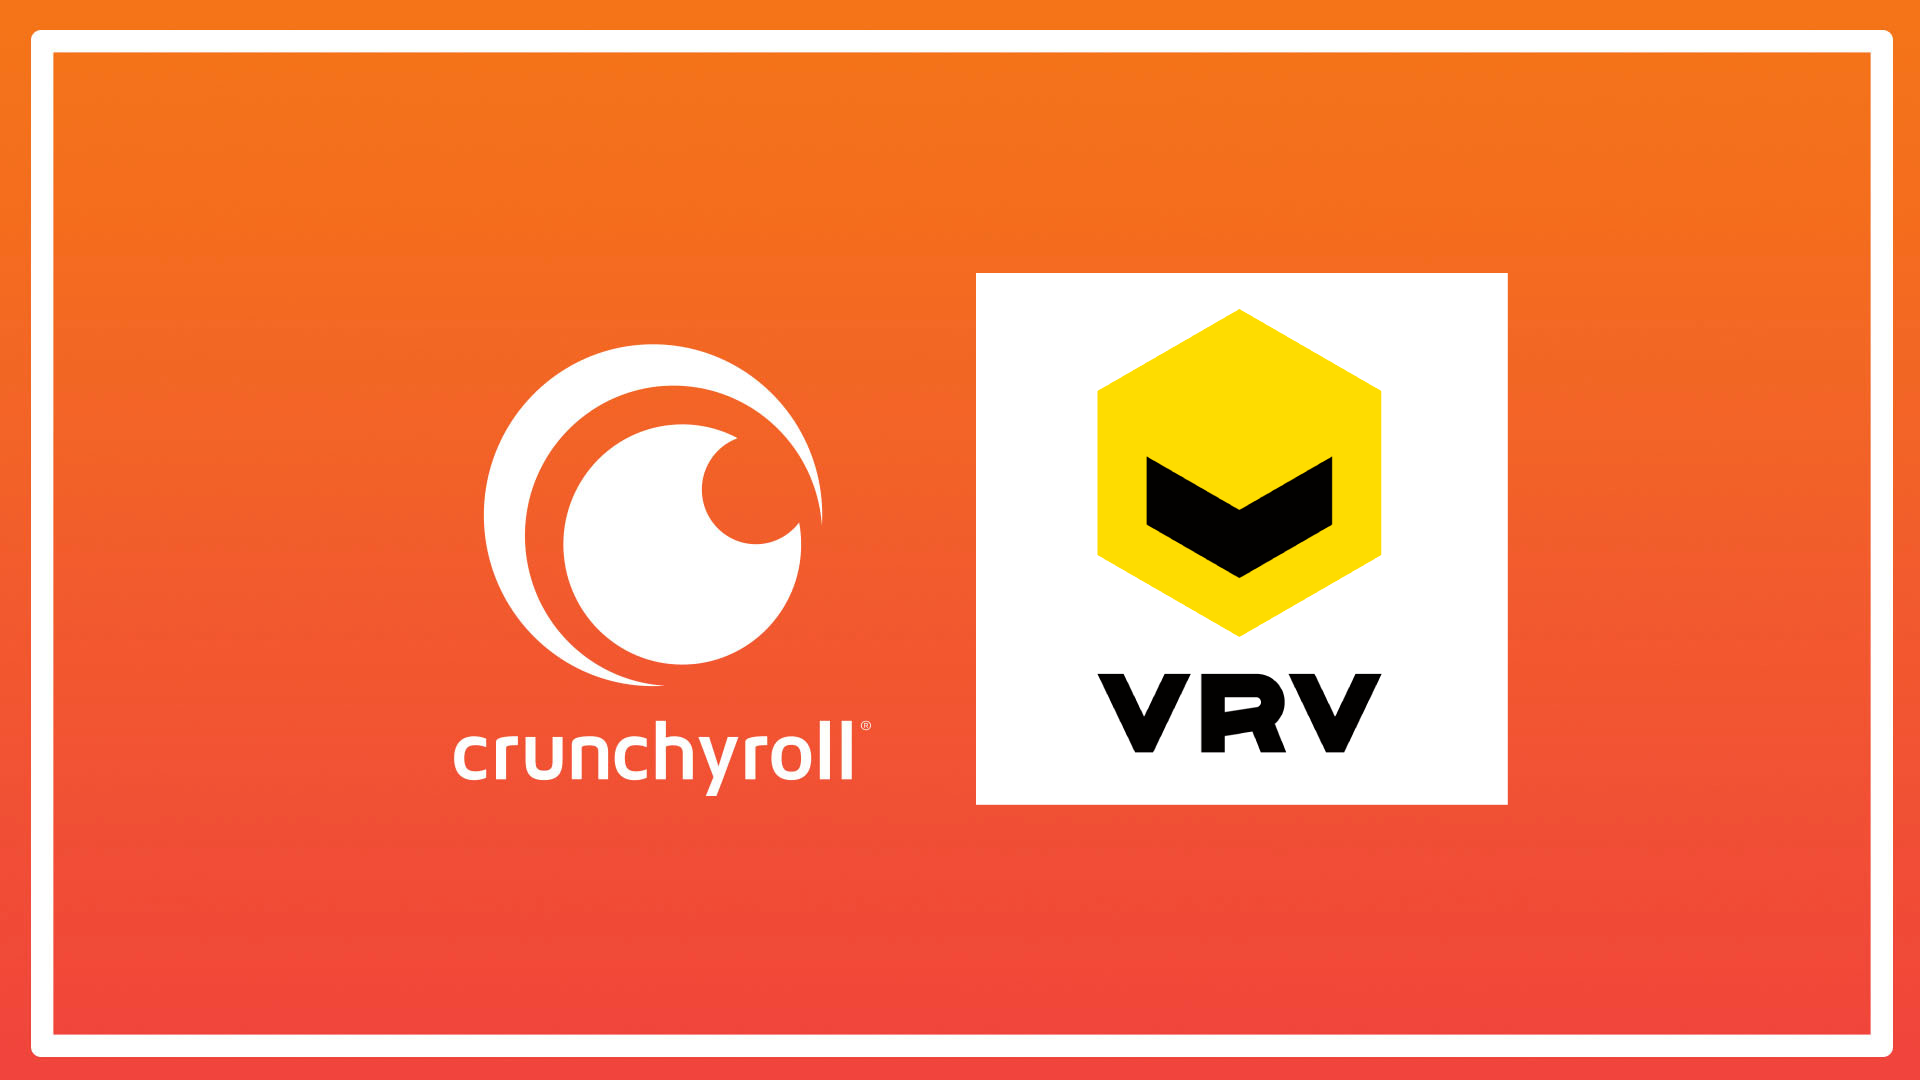 How to Access VRV with VPN - YouTube